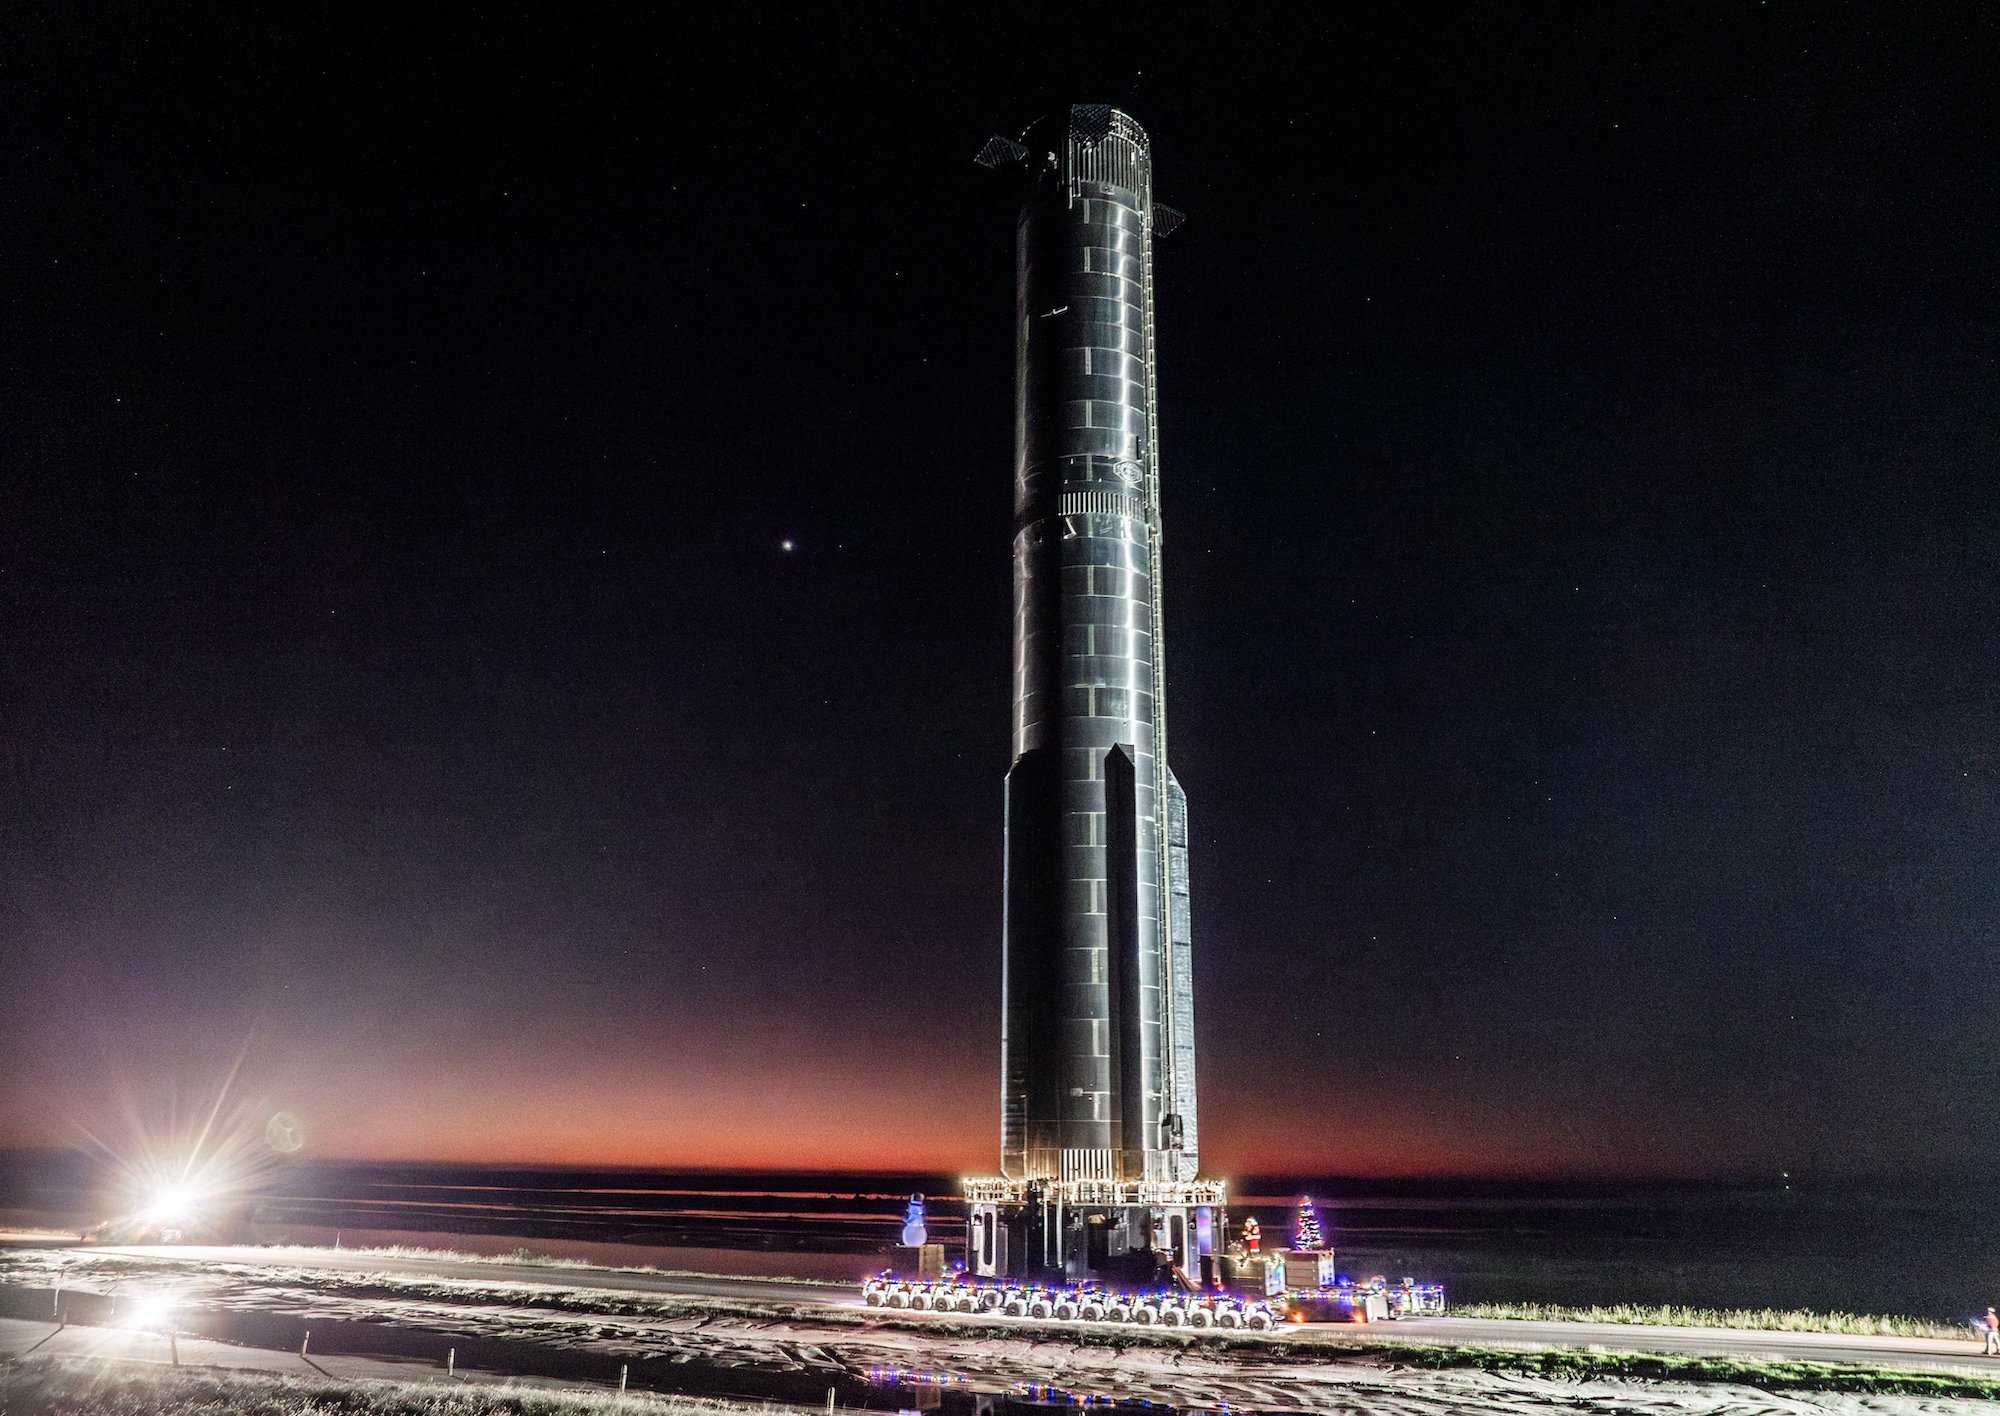 SpaceX's Super Heavy booster on its way to the launchpad.